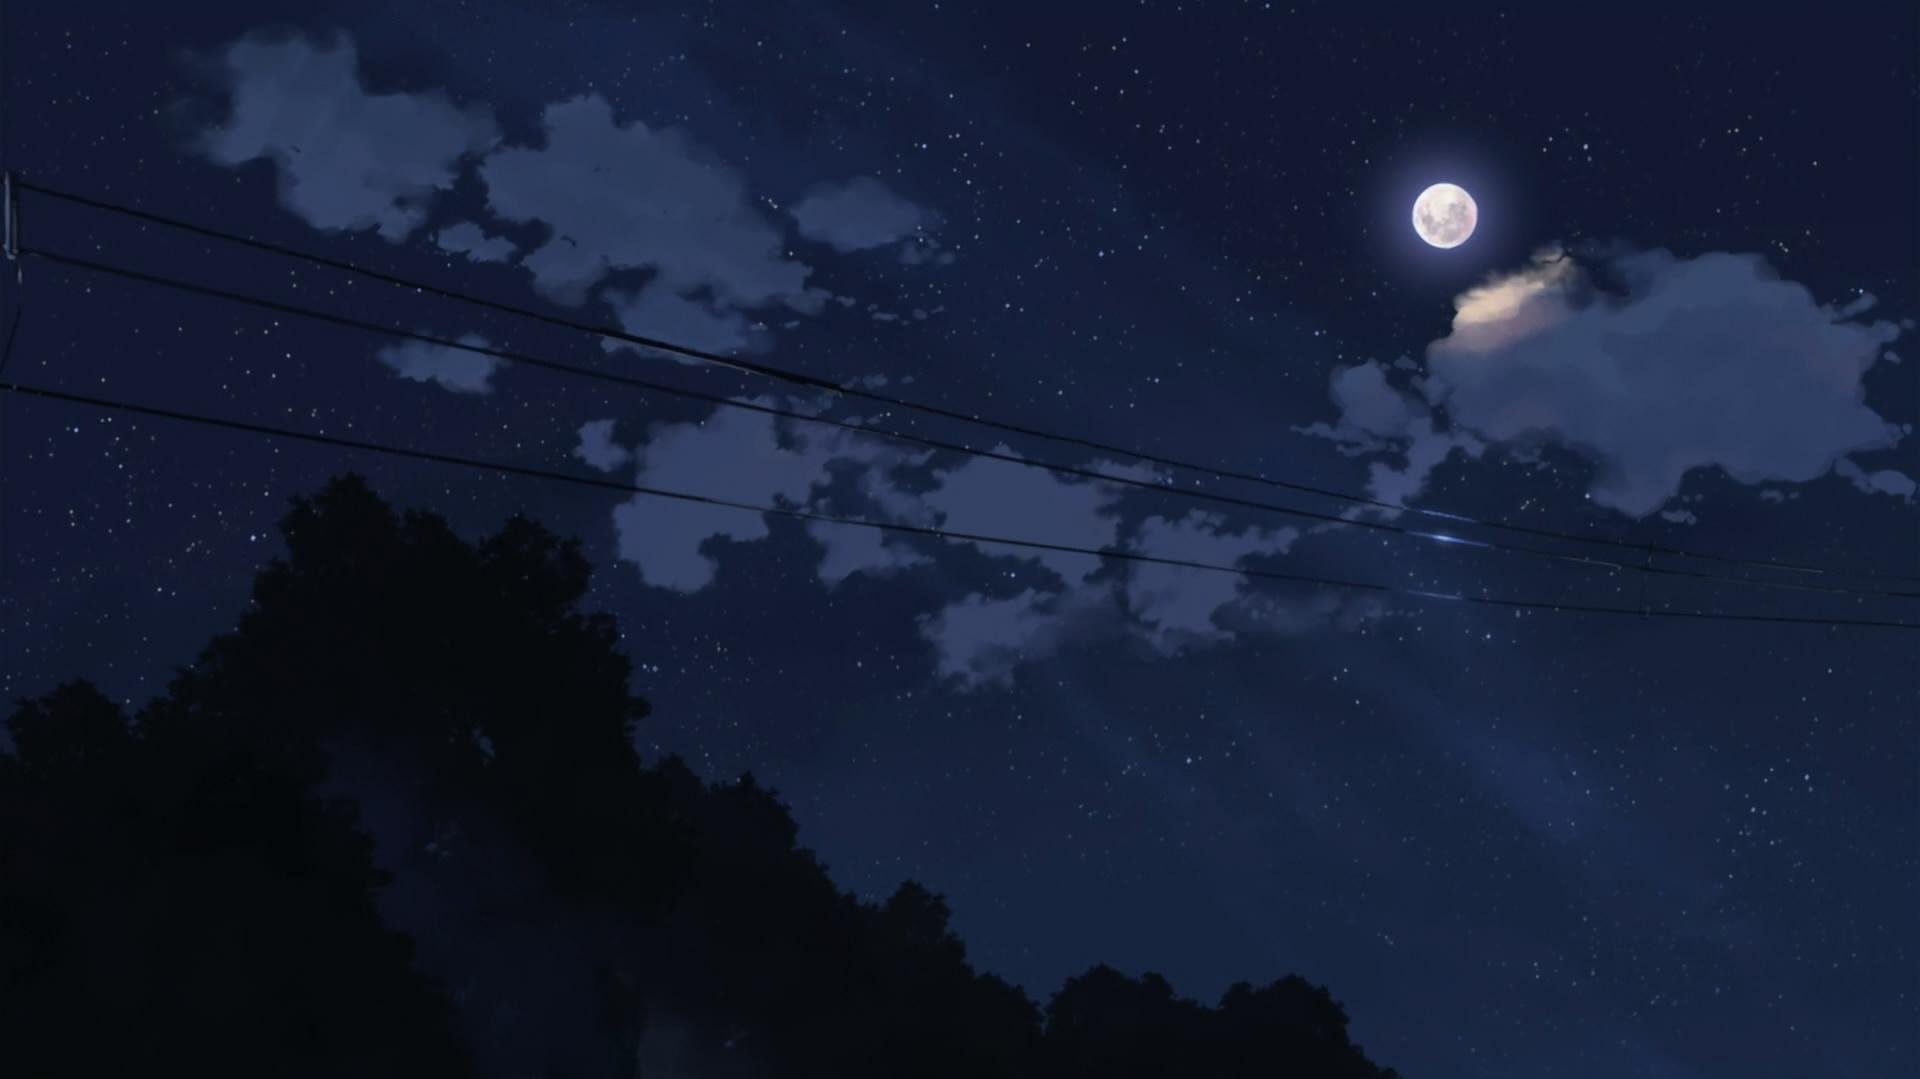 Free download Download Anime Night Sky Wallpaper 5776 1920x1080 px